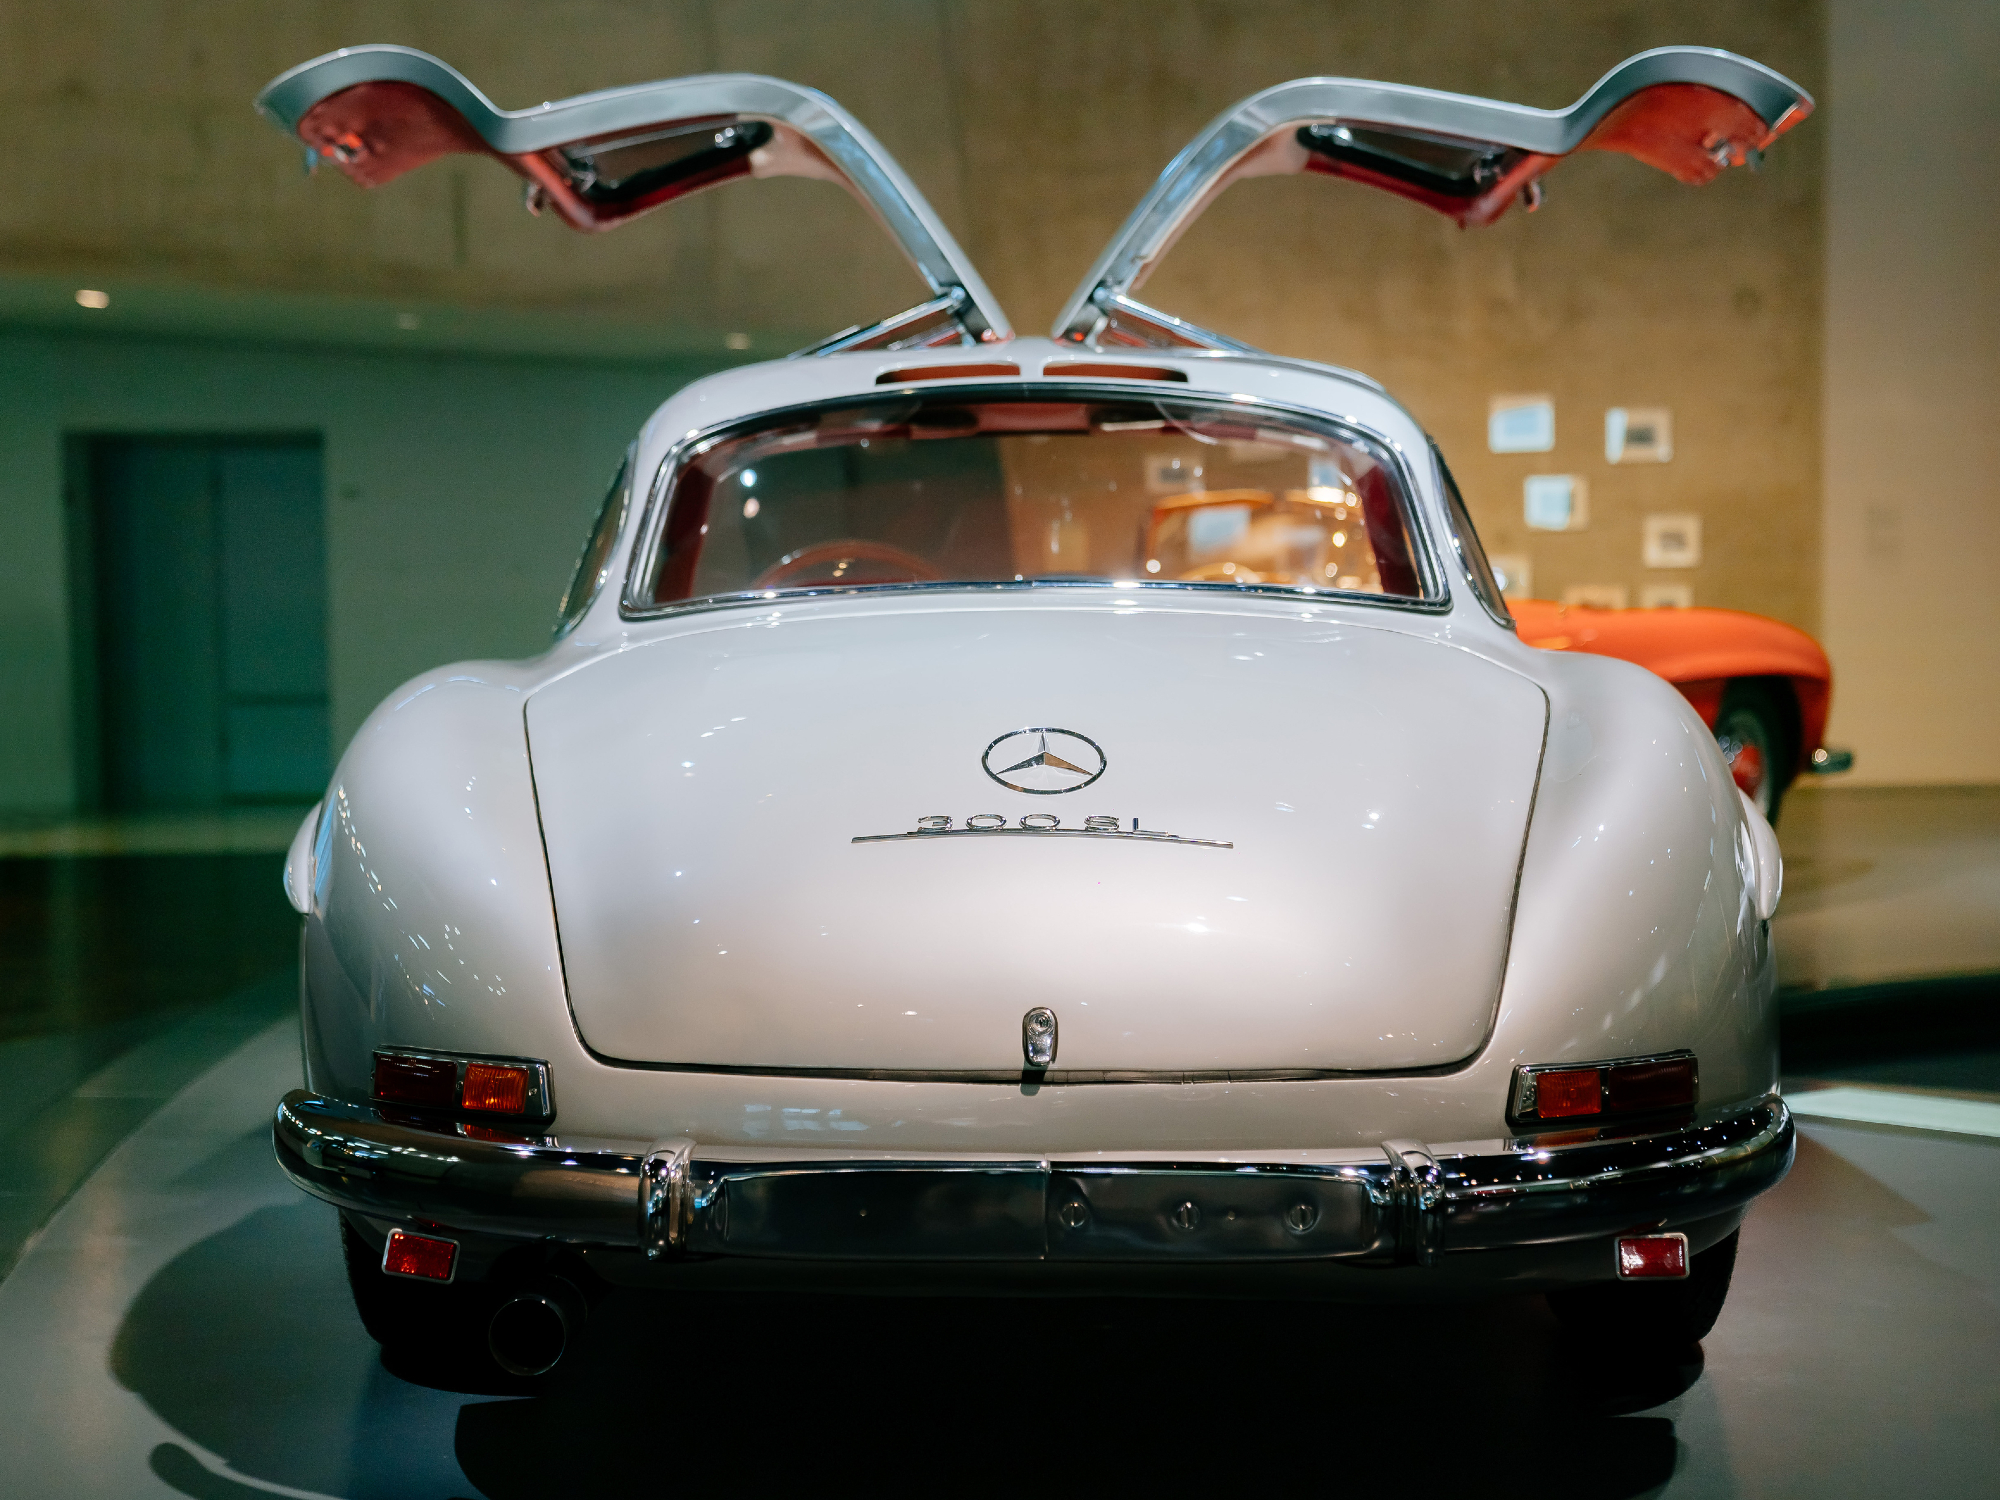 Mercedes-Benz 300 SL Coupe on display at the Mercedes-Benz Museum view from the back of the car with gullwing doors open